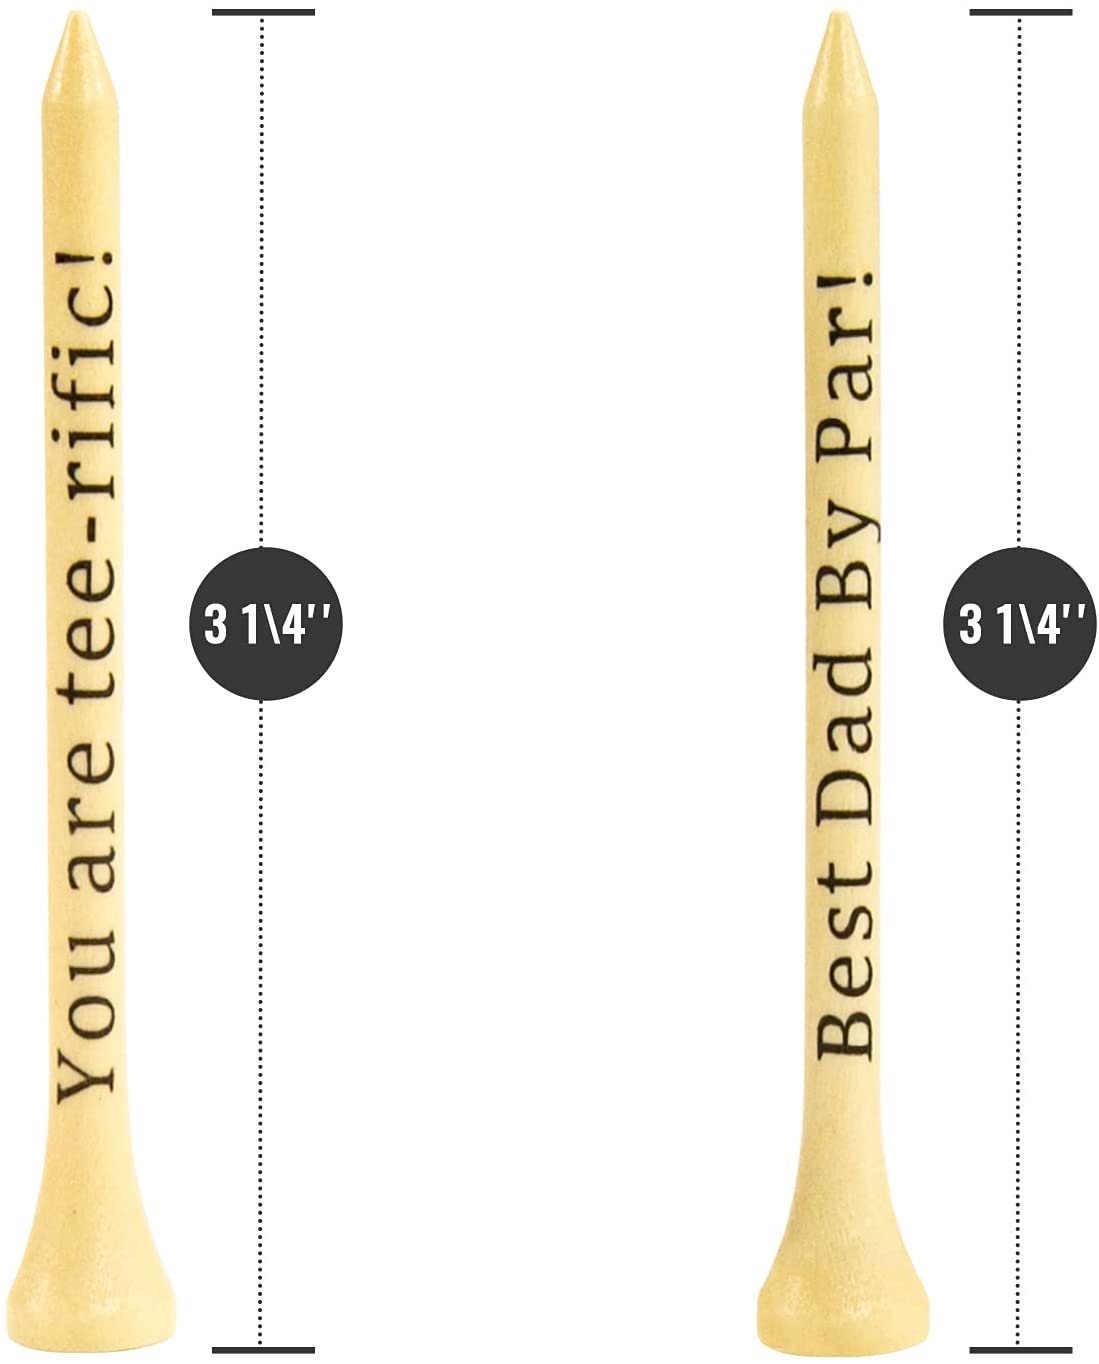 Father‘s Day Gifts - Best Dad by Par - You Are Tee-Rific, 3-1/4 Inch Wood Golf Tees